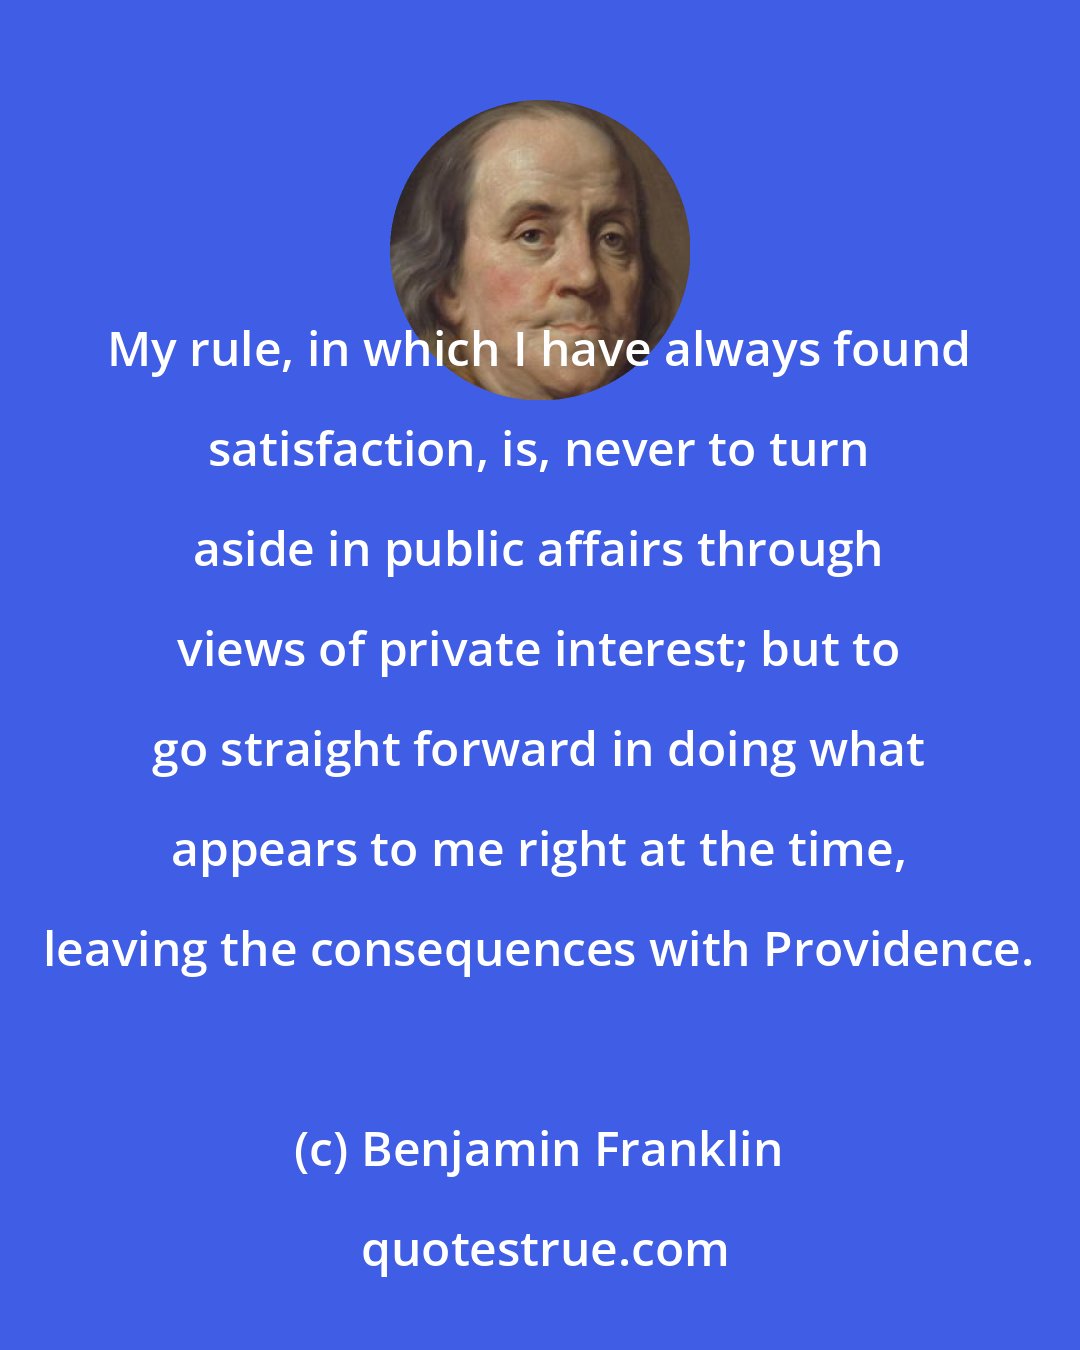 Benjamin Franklin: My rule, in which I have always found satisfaction, is, never to turn aside in public affairs through views of private interest; but to go straight forward in doing what appears to me right at the time, leaving the consequences with Providence.